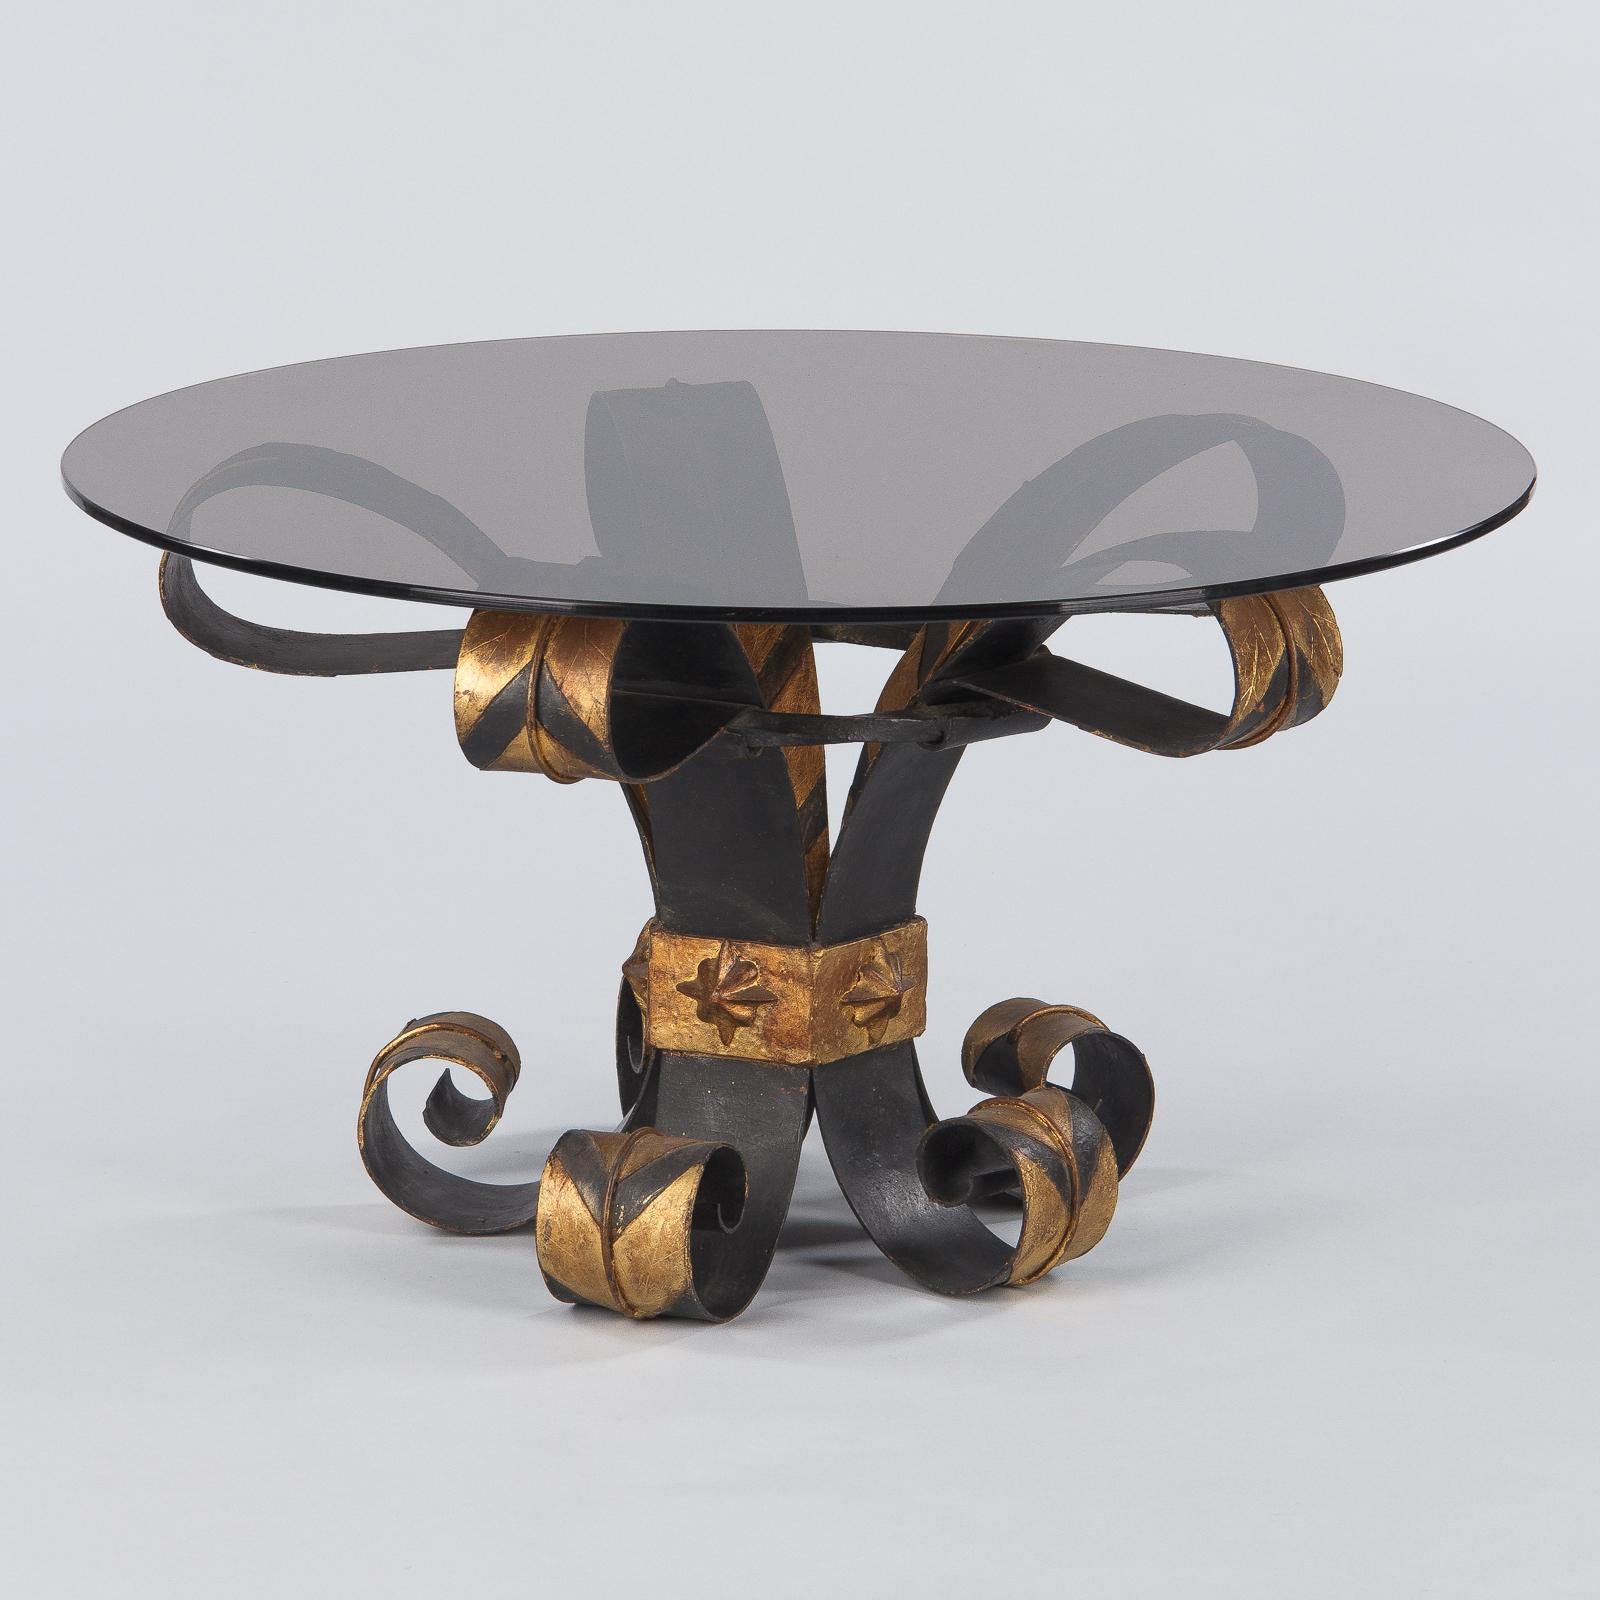 20th Century Midcentury French Wrought Iron and Glass Coffee Table, 1960s